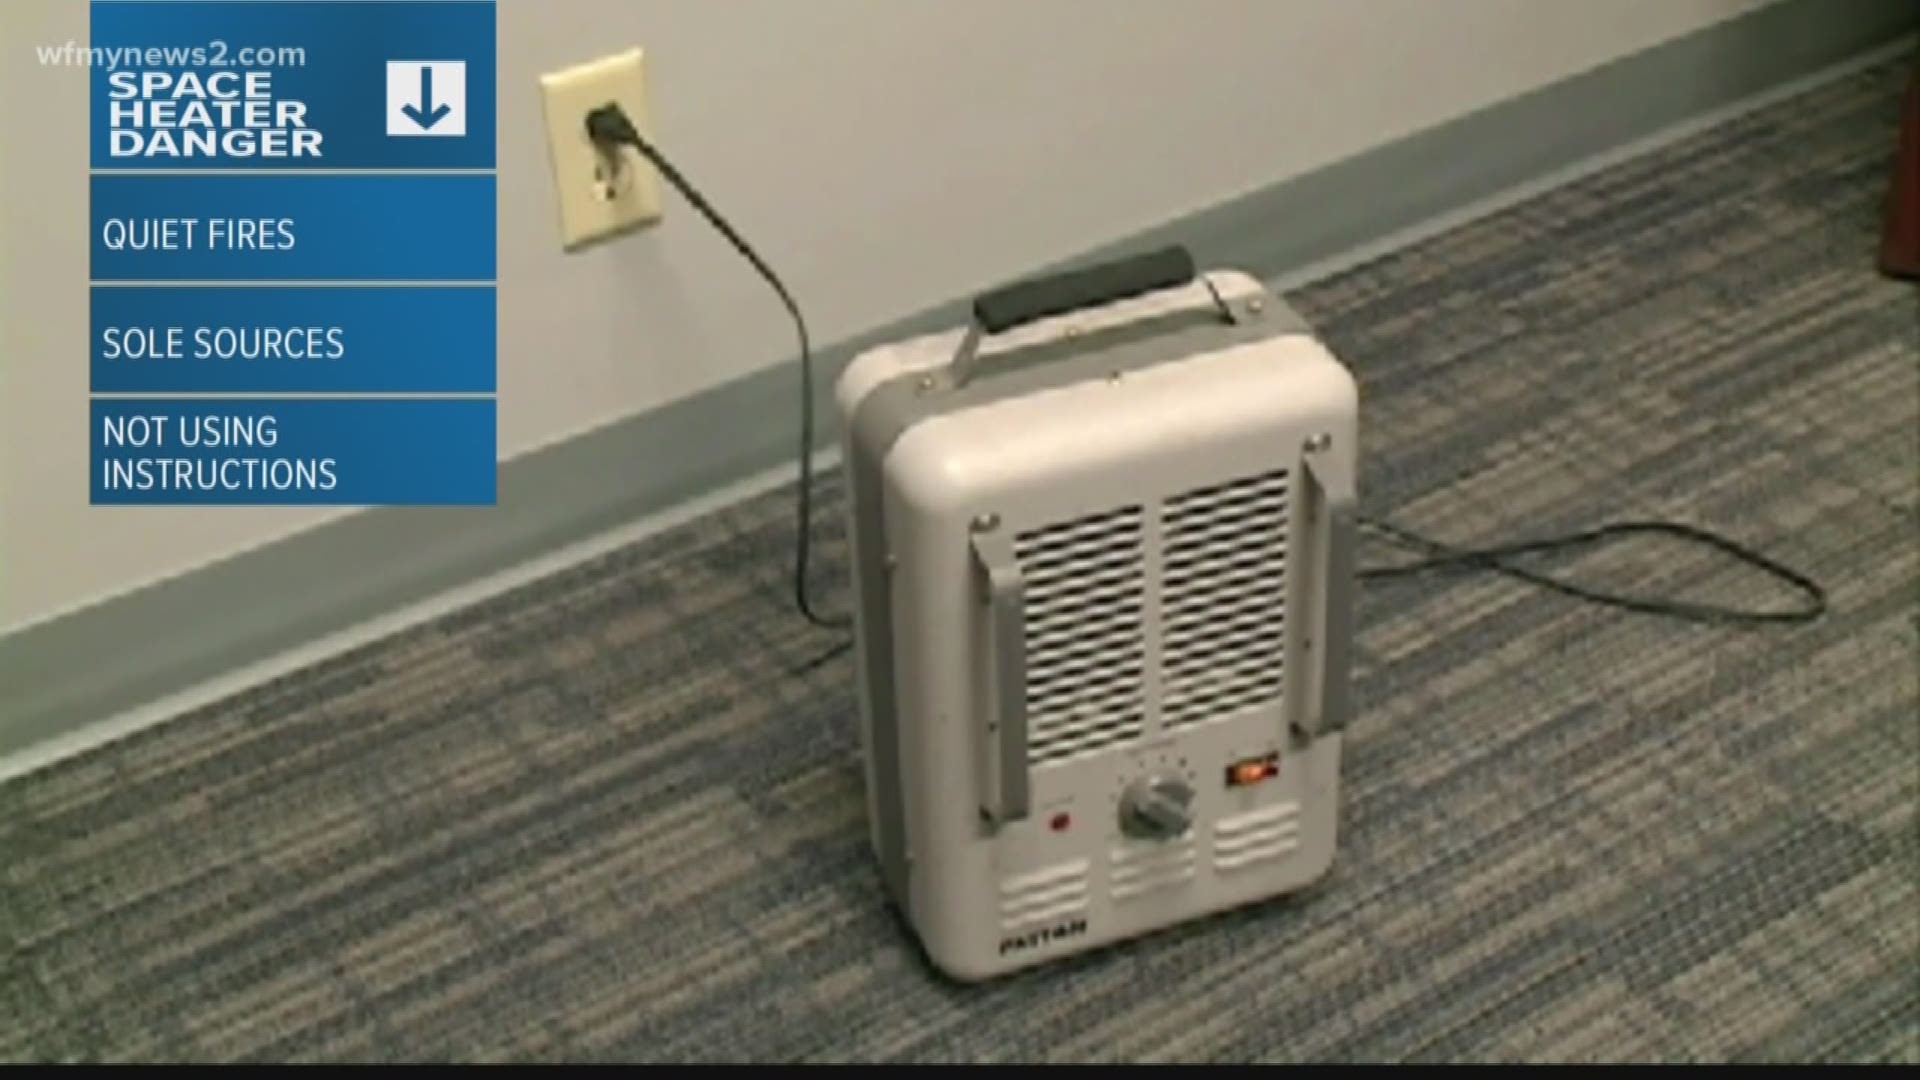 The dangers of Space heaters and how to use them safely.